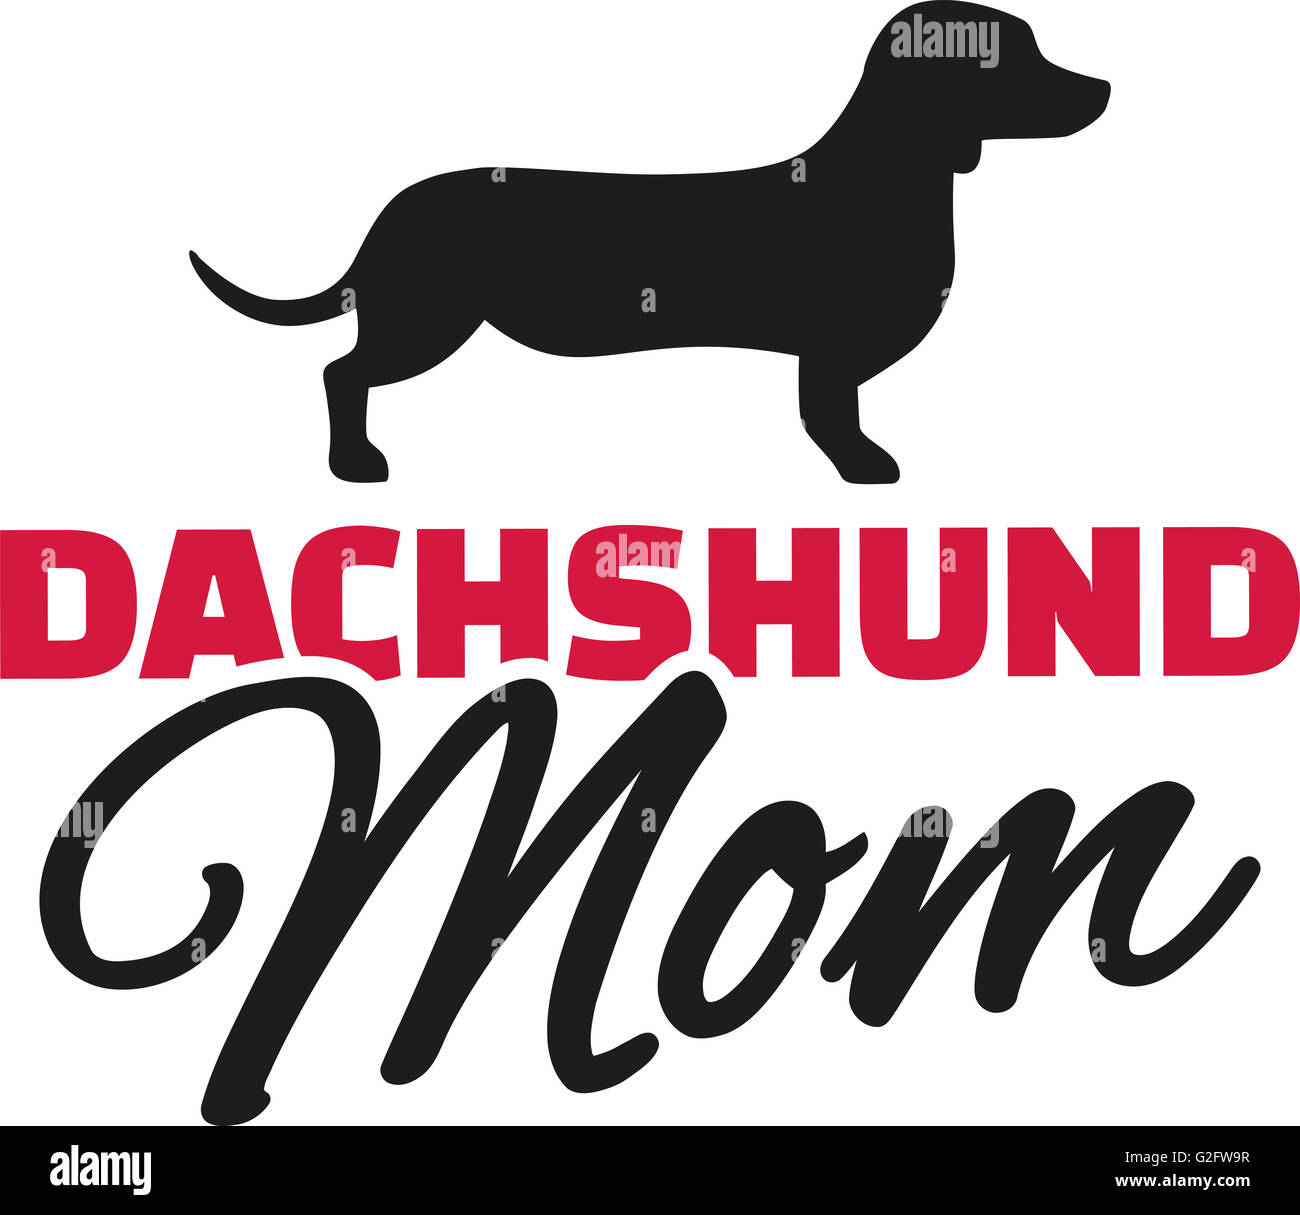 Dachshund Mom with dog silhouette Stock Photo